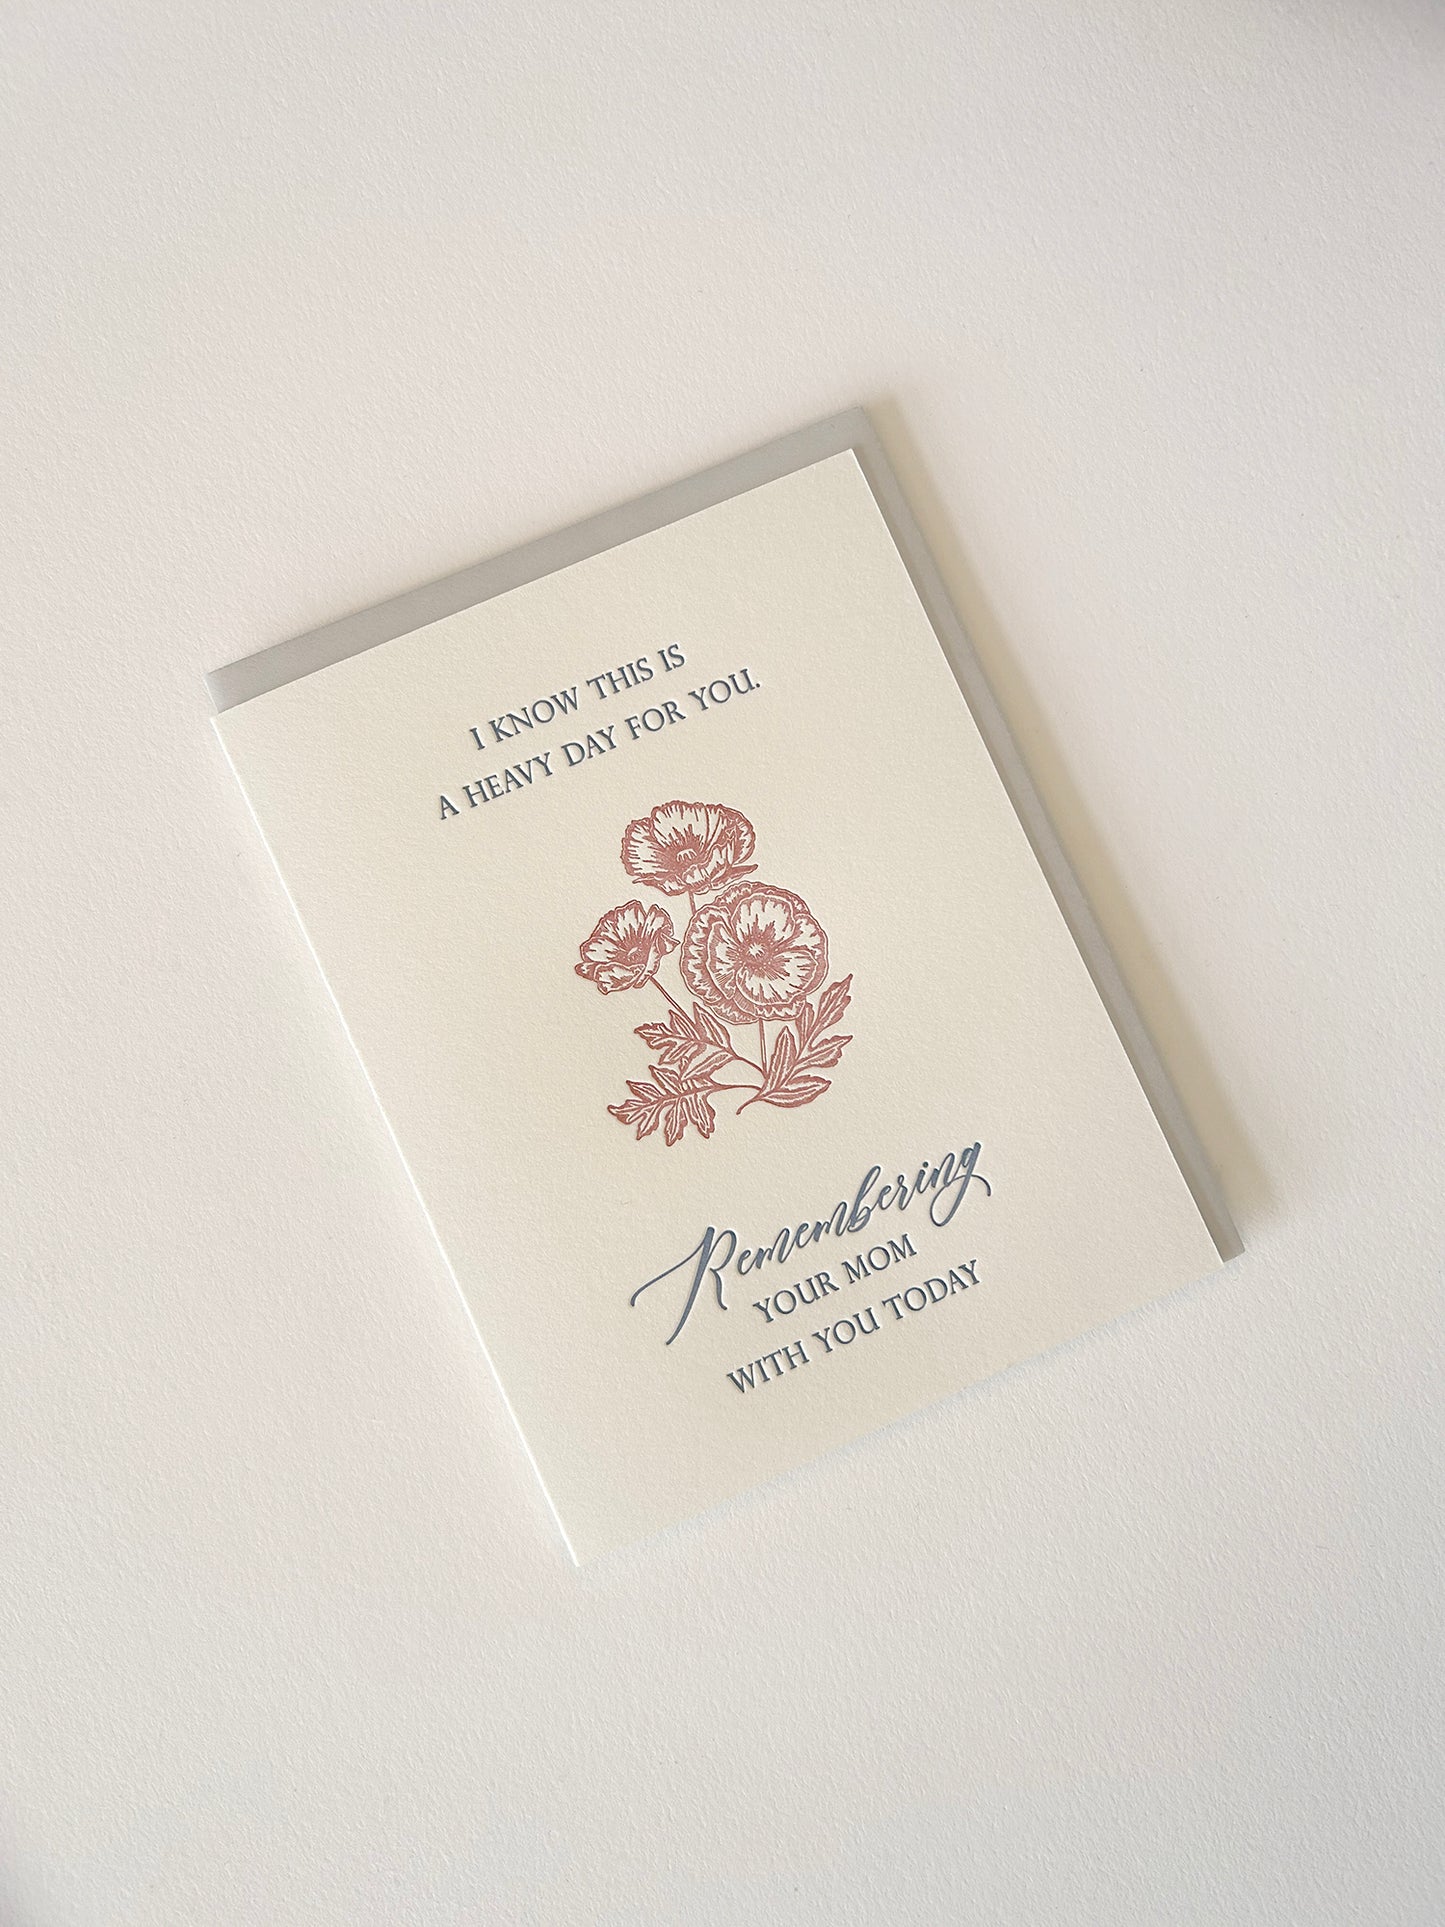 Letterpress mother's day card with florals that says "I know today isn't easy for you. Remembering your mom with you today" by Rust Belt Love